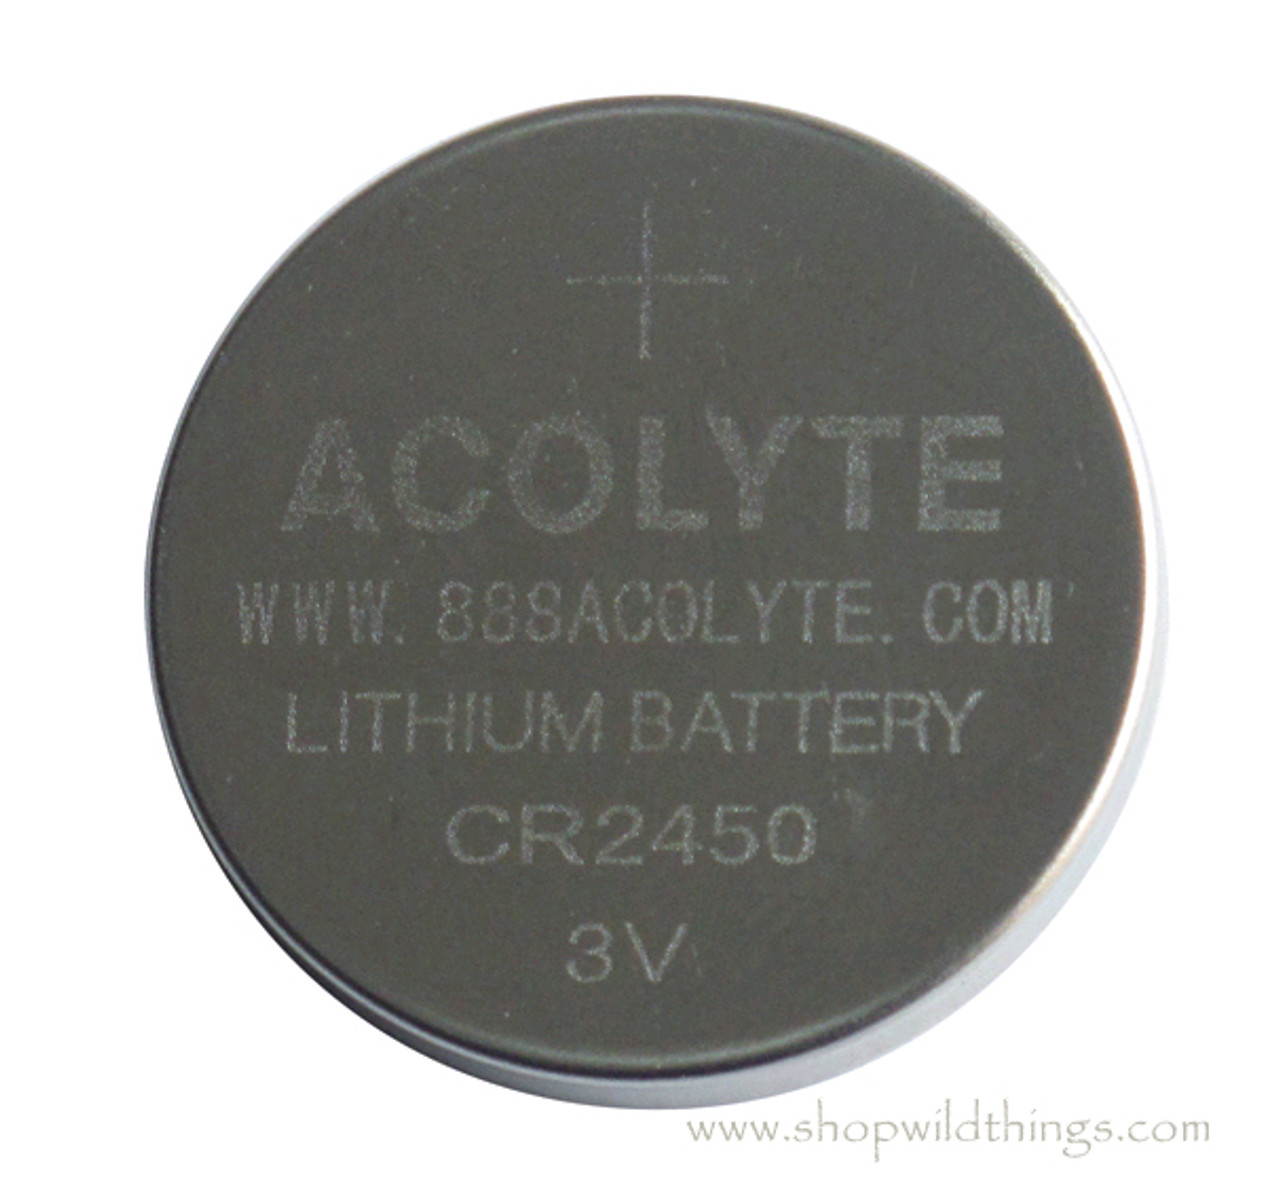 Acolyte CR2450 3V Lithium Coin Batteries, 4 Pack - For SUMIX